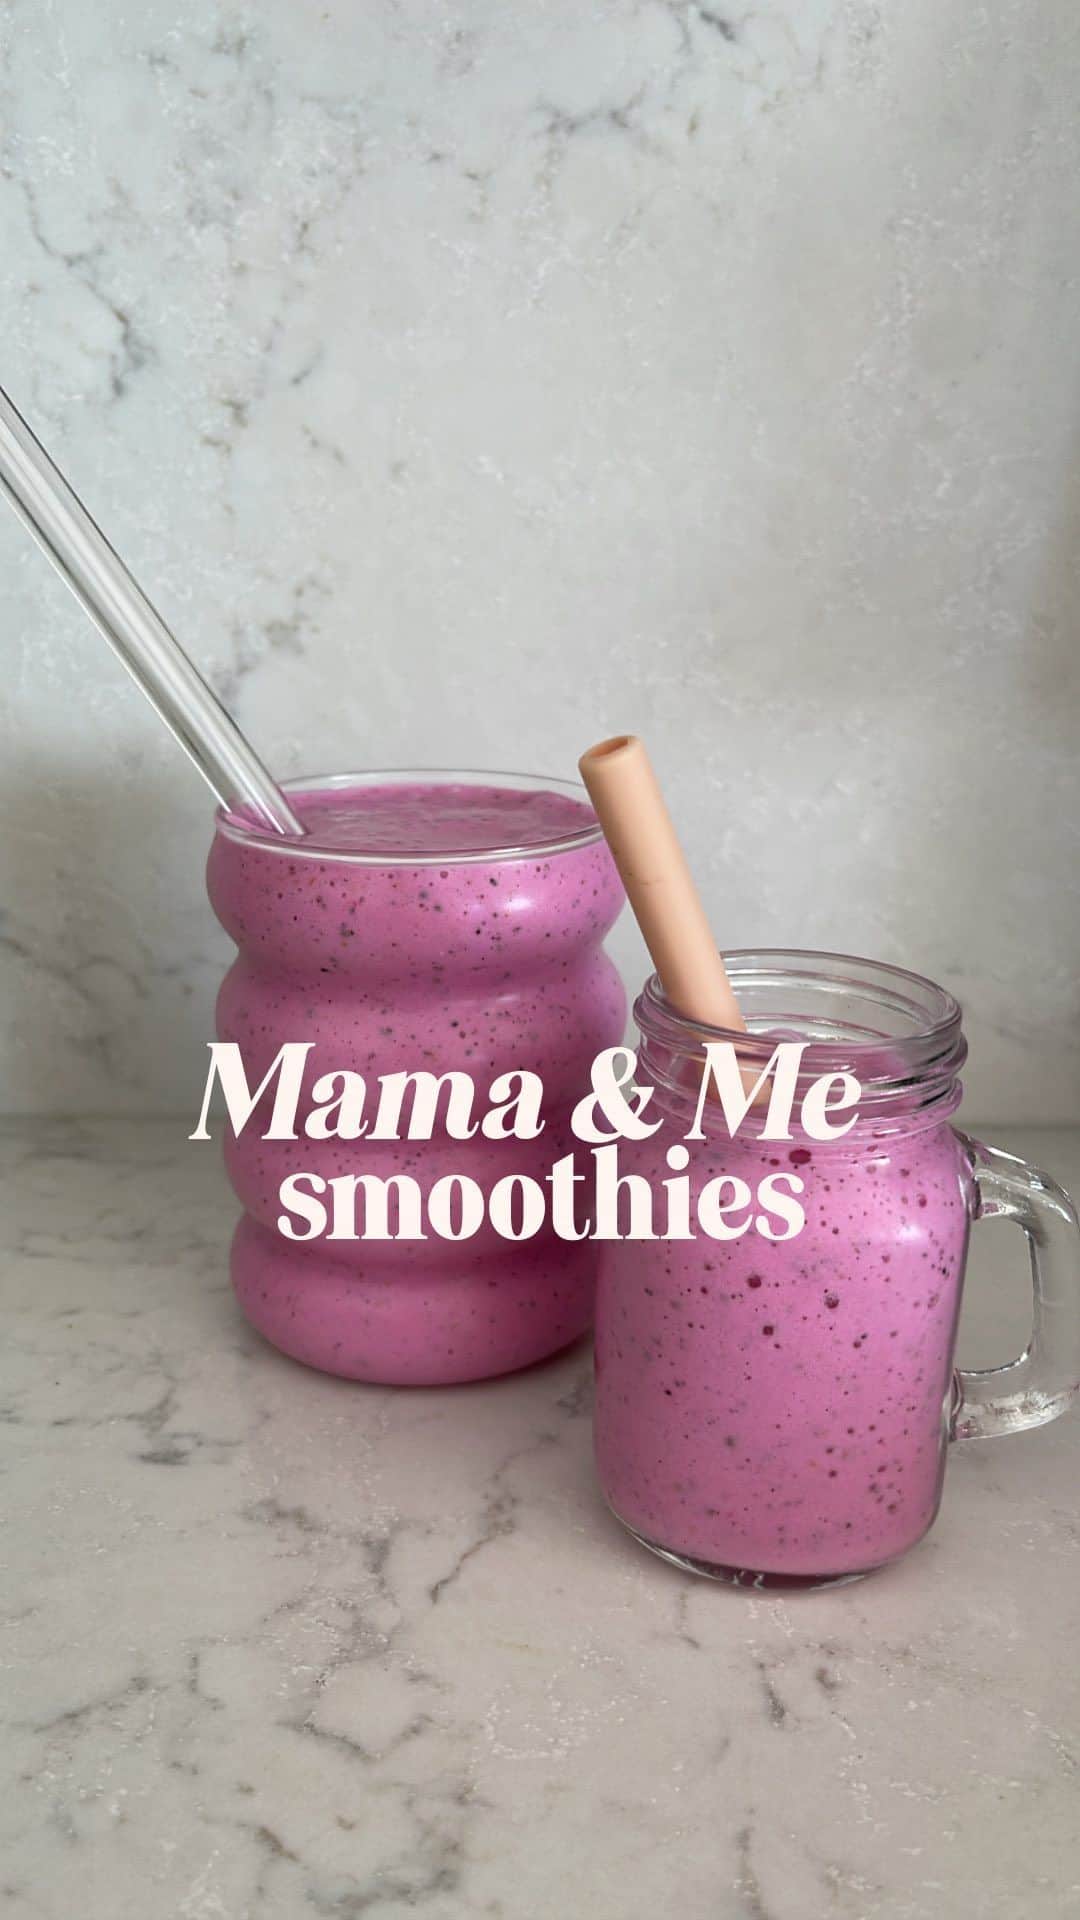 Stephanie Sterjovskiのインスタグラム：「🩷BARBIE GIRL SMOOTHIE🩷 I’m starting a new “Mama & Me” smoothies for summer series and this one made my toddler go 🤩 After a long, sunny morning at the park I made this refreshing dragonfruit smoothie that tasted as good as it looked! It’s super simple… 🥤 . RECIPE: 1 cup of coconut milk 1 cup of mixed tropical frozen fruit: pineapple, dragonfruit & passion fruit 1 tbsp chia seeds #toddlersmoothies #mommyandmesmoothies #smoothiesforsummer #barbiesmoothie」